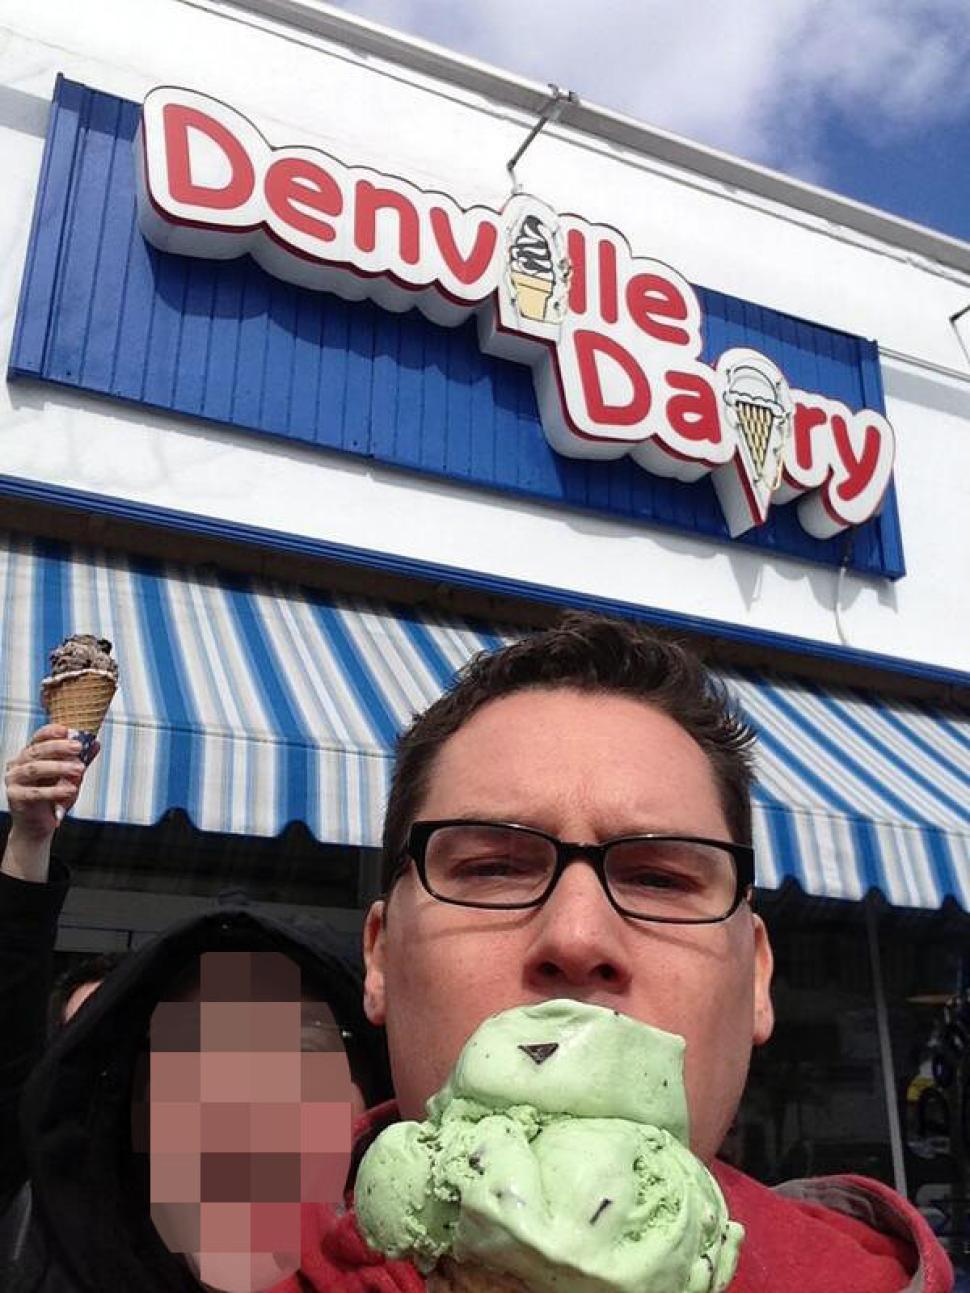 Twitter photo of Bryan Singer at an ice cream shop in Denville, NJ posted on March 23, 2013.